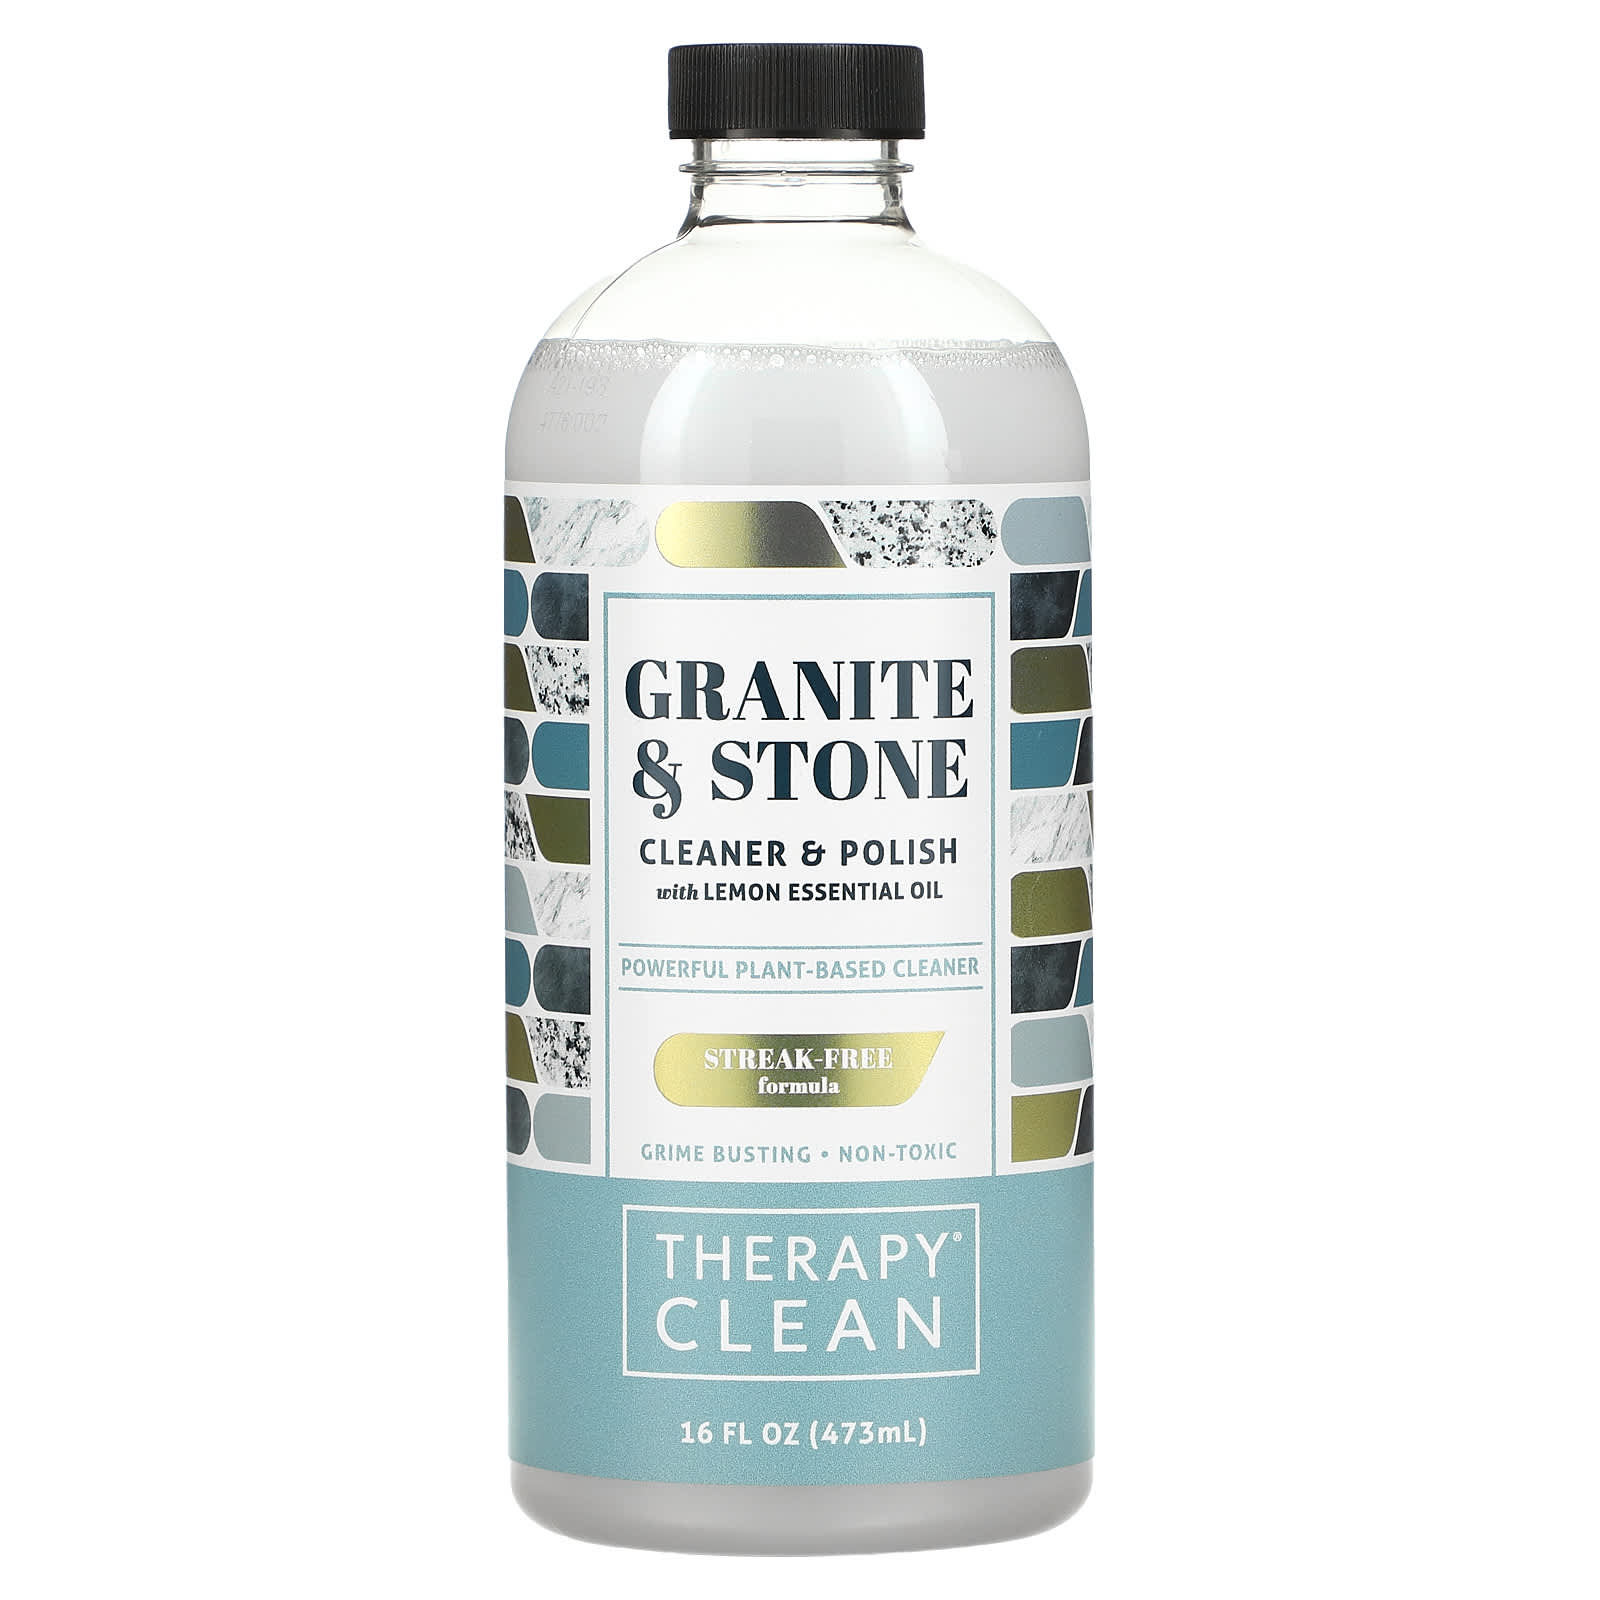 Therapy Clean-Granite & Stone-Cleaner & Polish with Lemon Essential Oil-16 fl oz (473 ml)